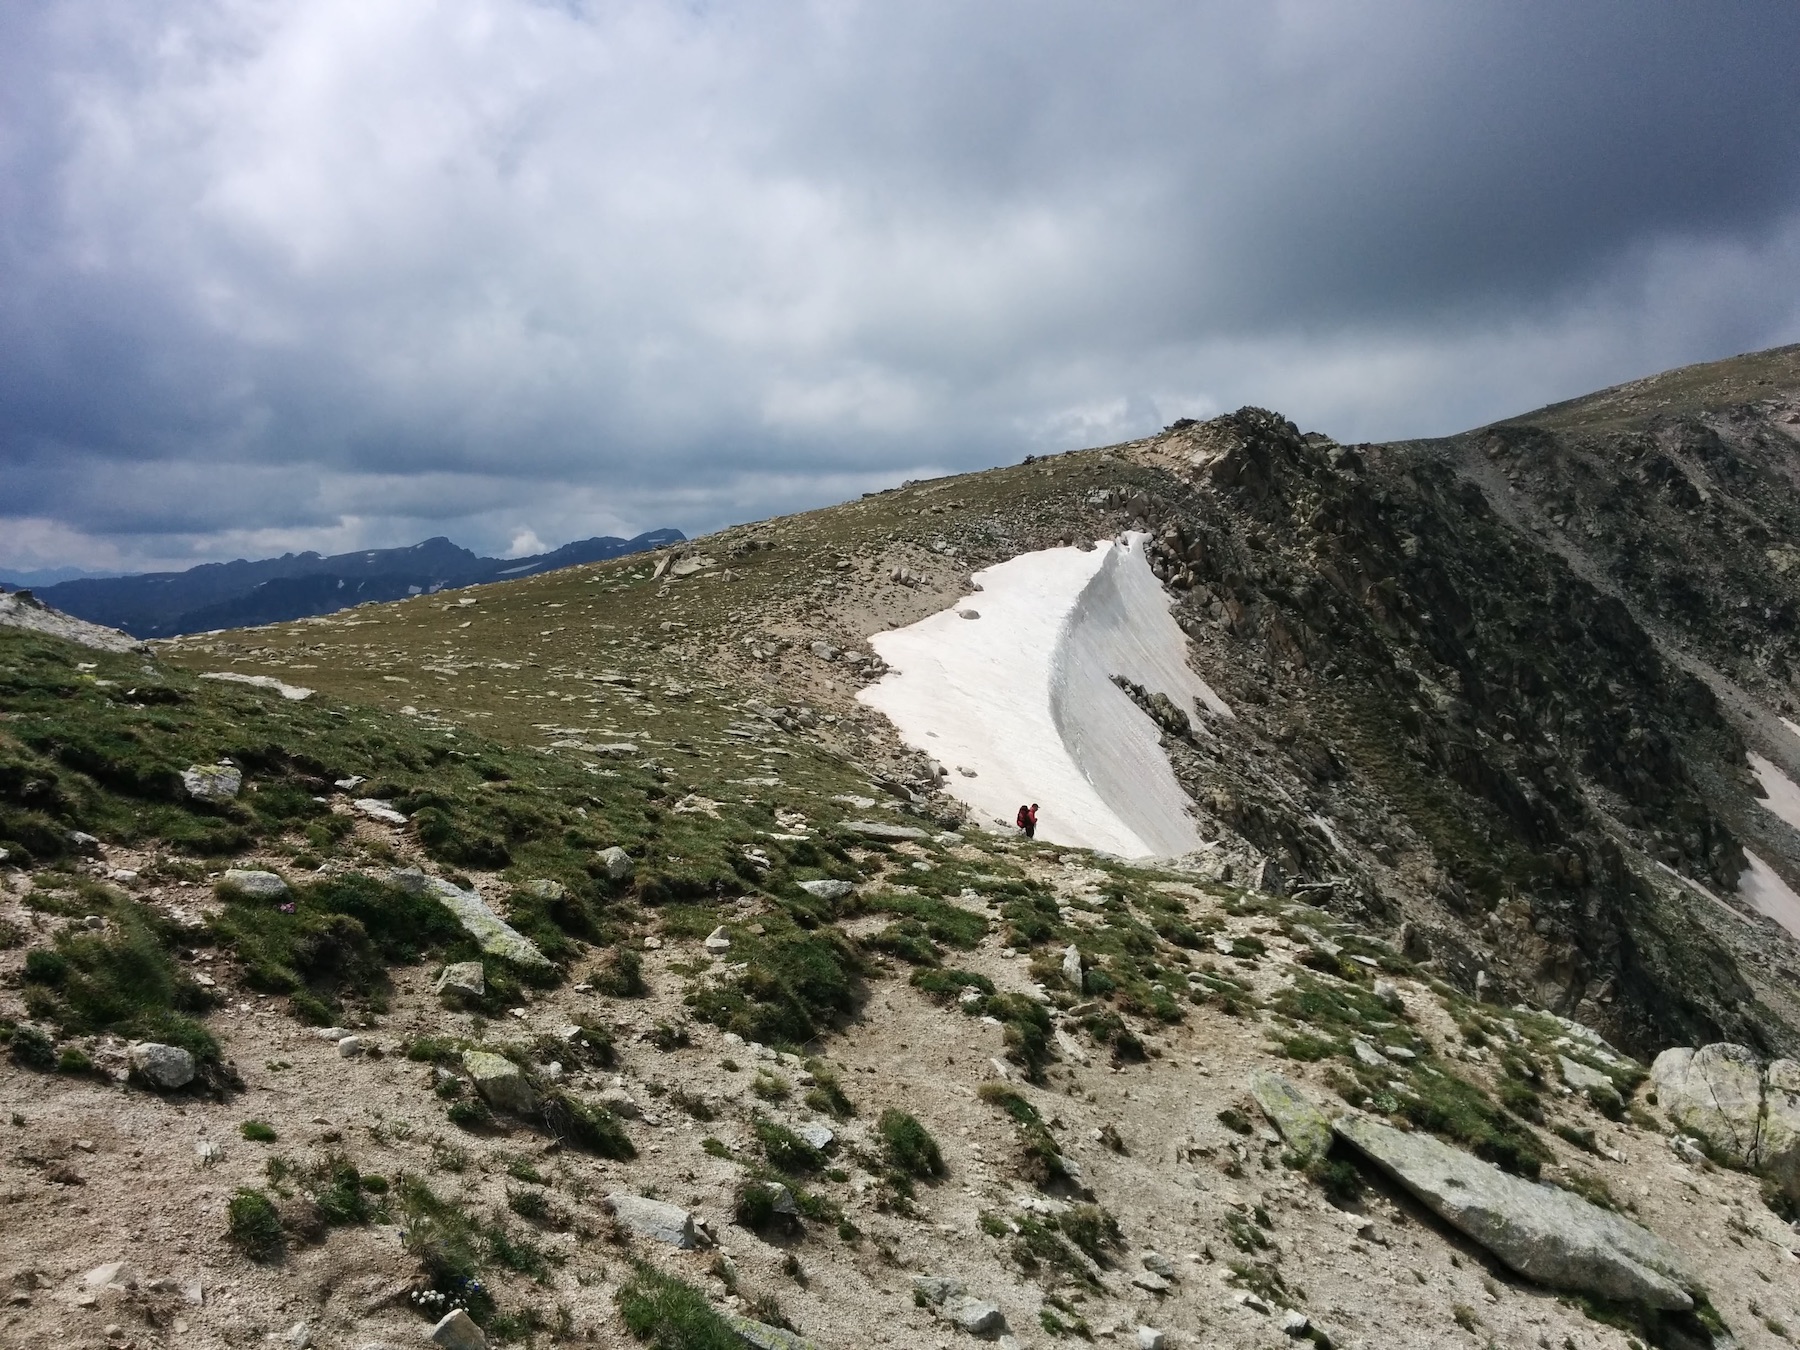 Snow at the pass, in July